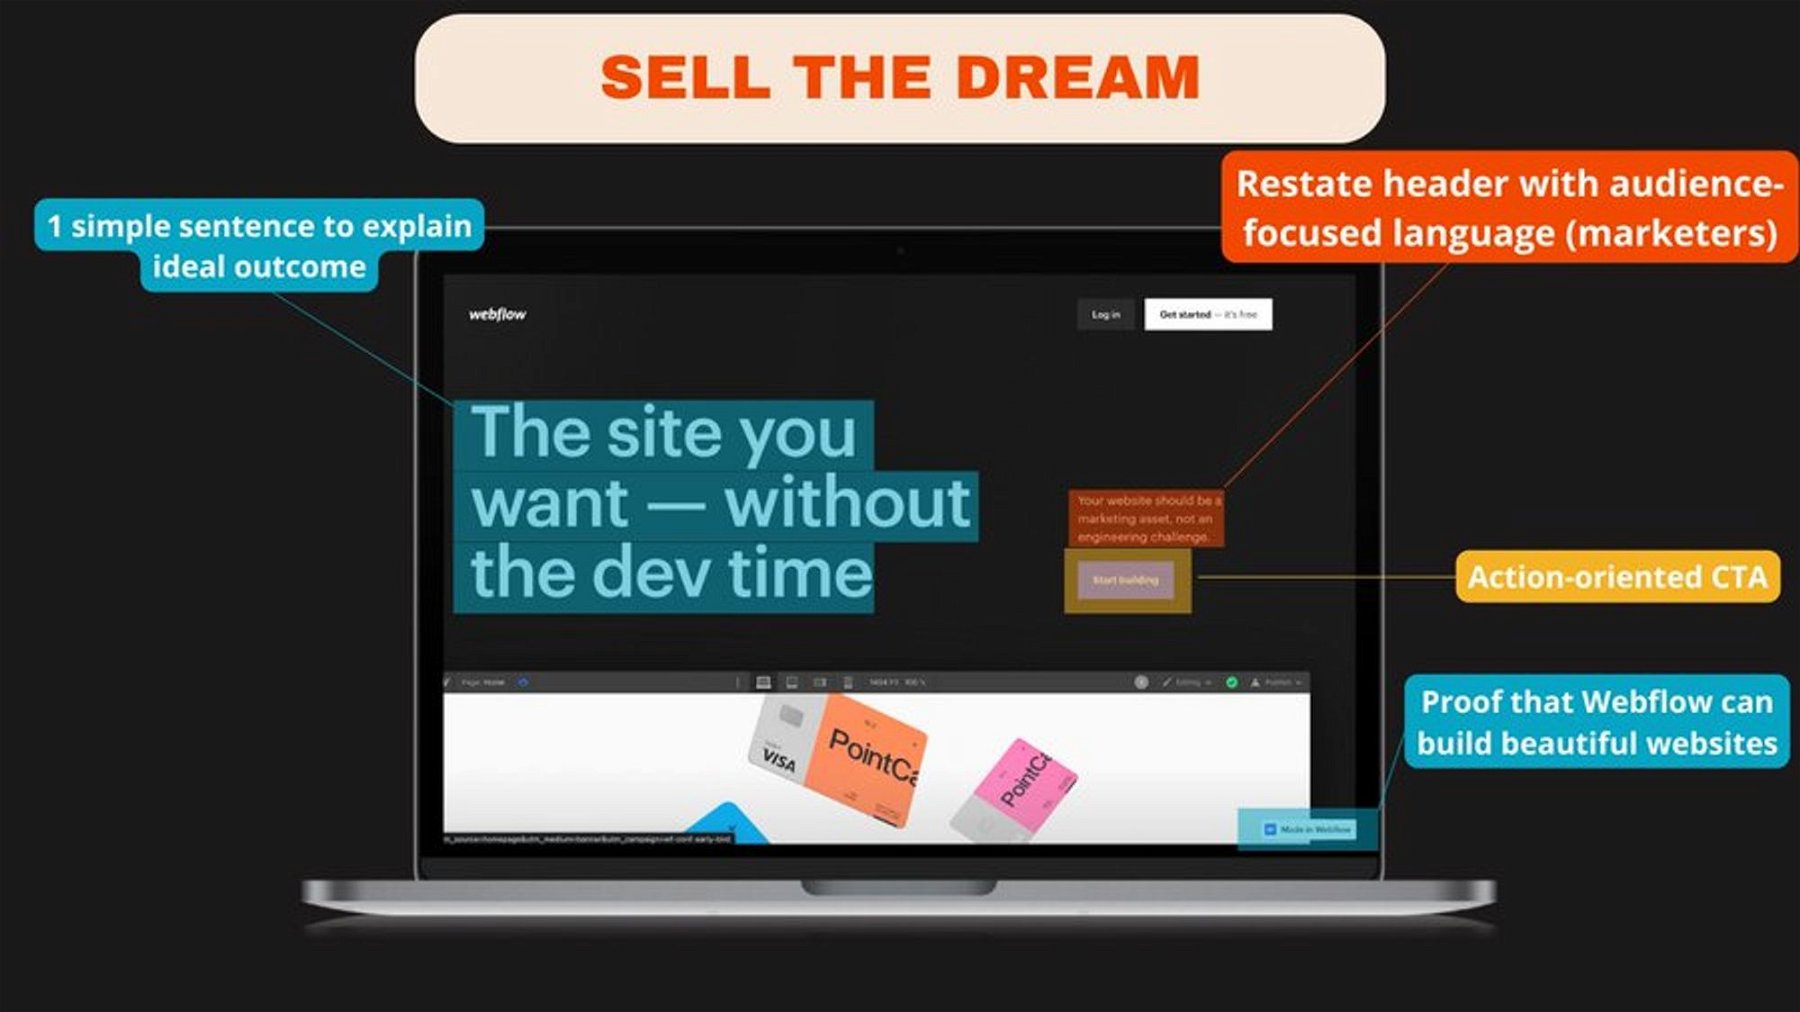 Webflow showcases sell the dream concept.